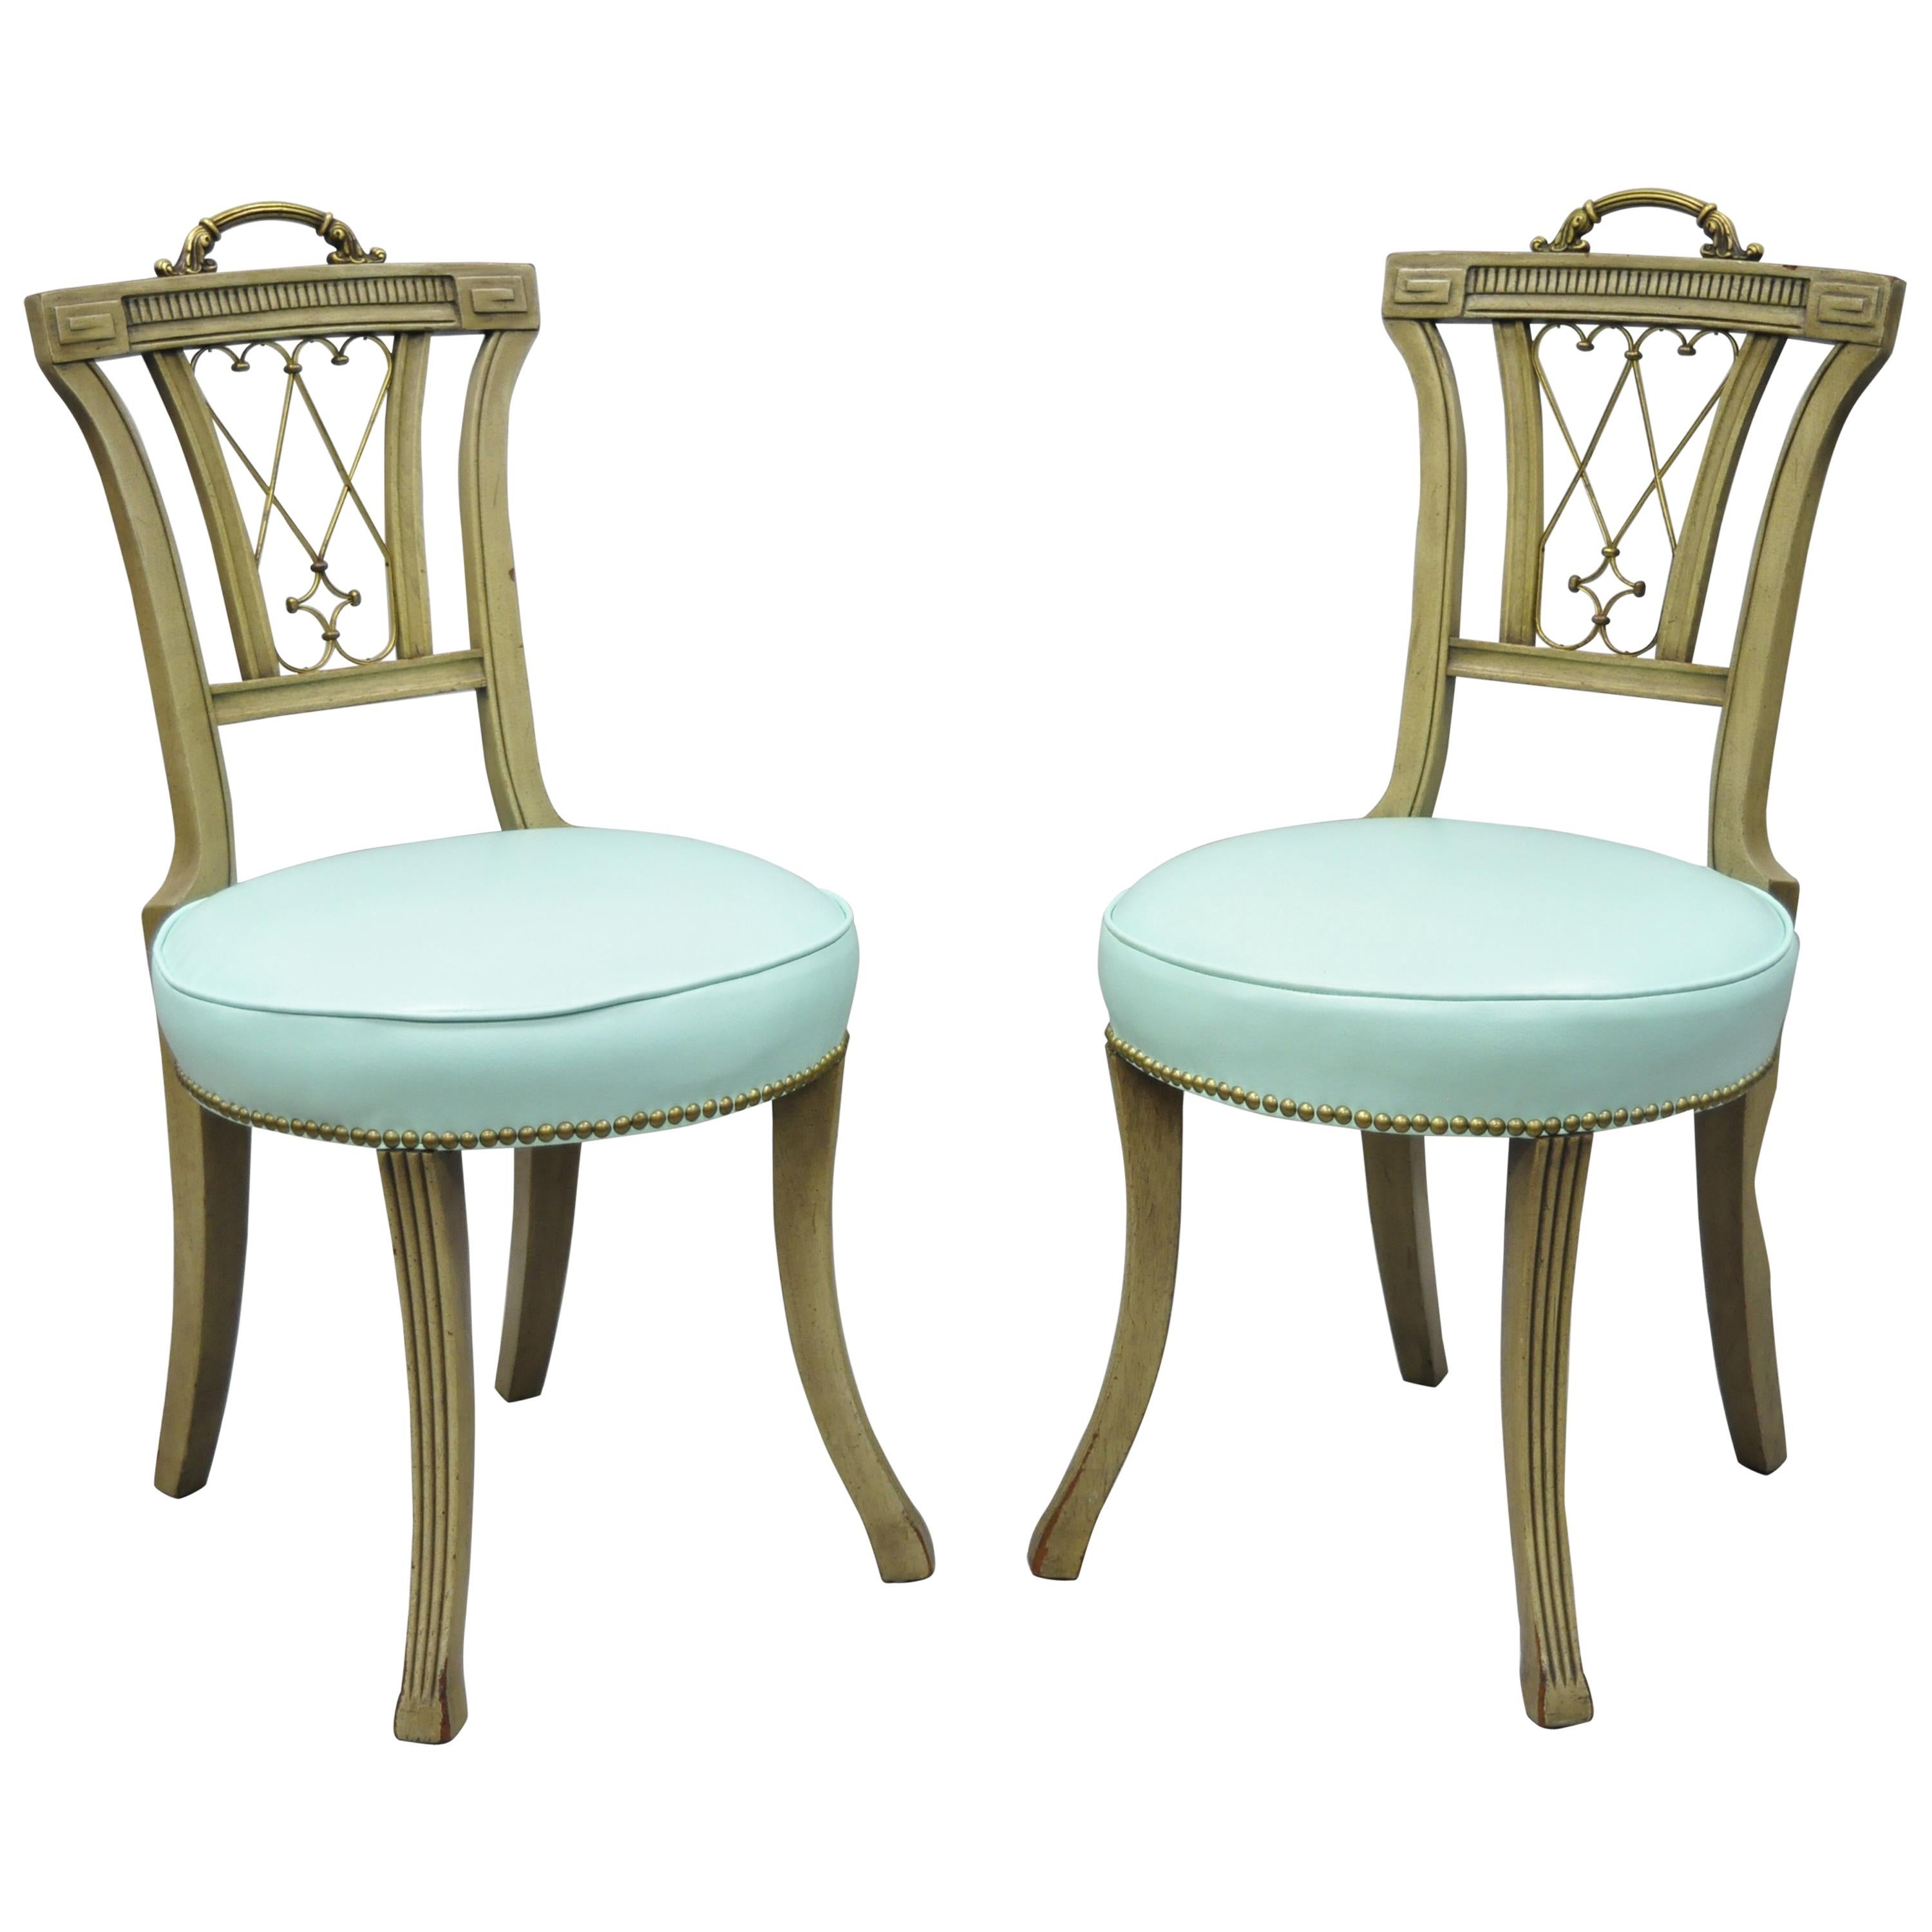 Carved Mahogany French Regency Style Chairs with Brass Handle & Aqua Vinyl, Pair For Sale